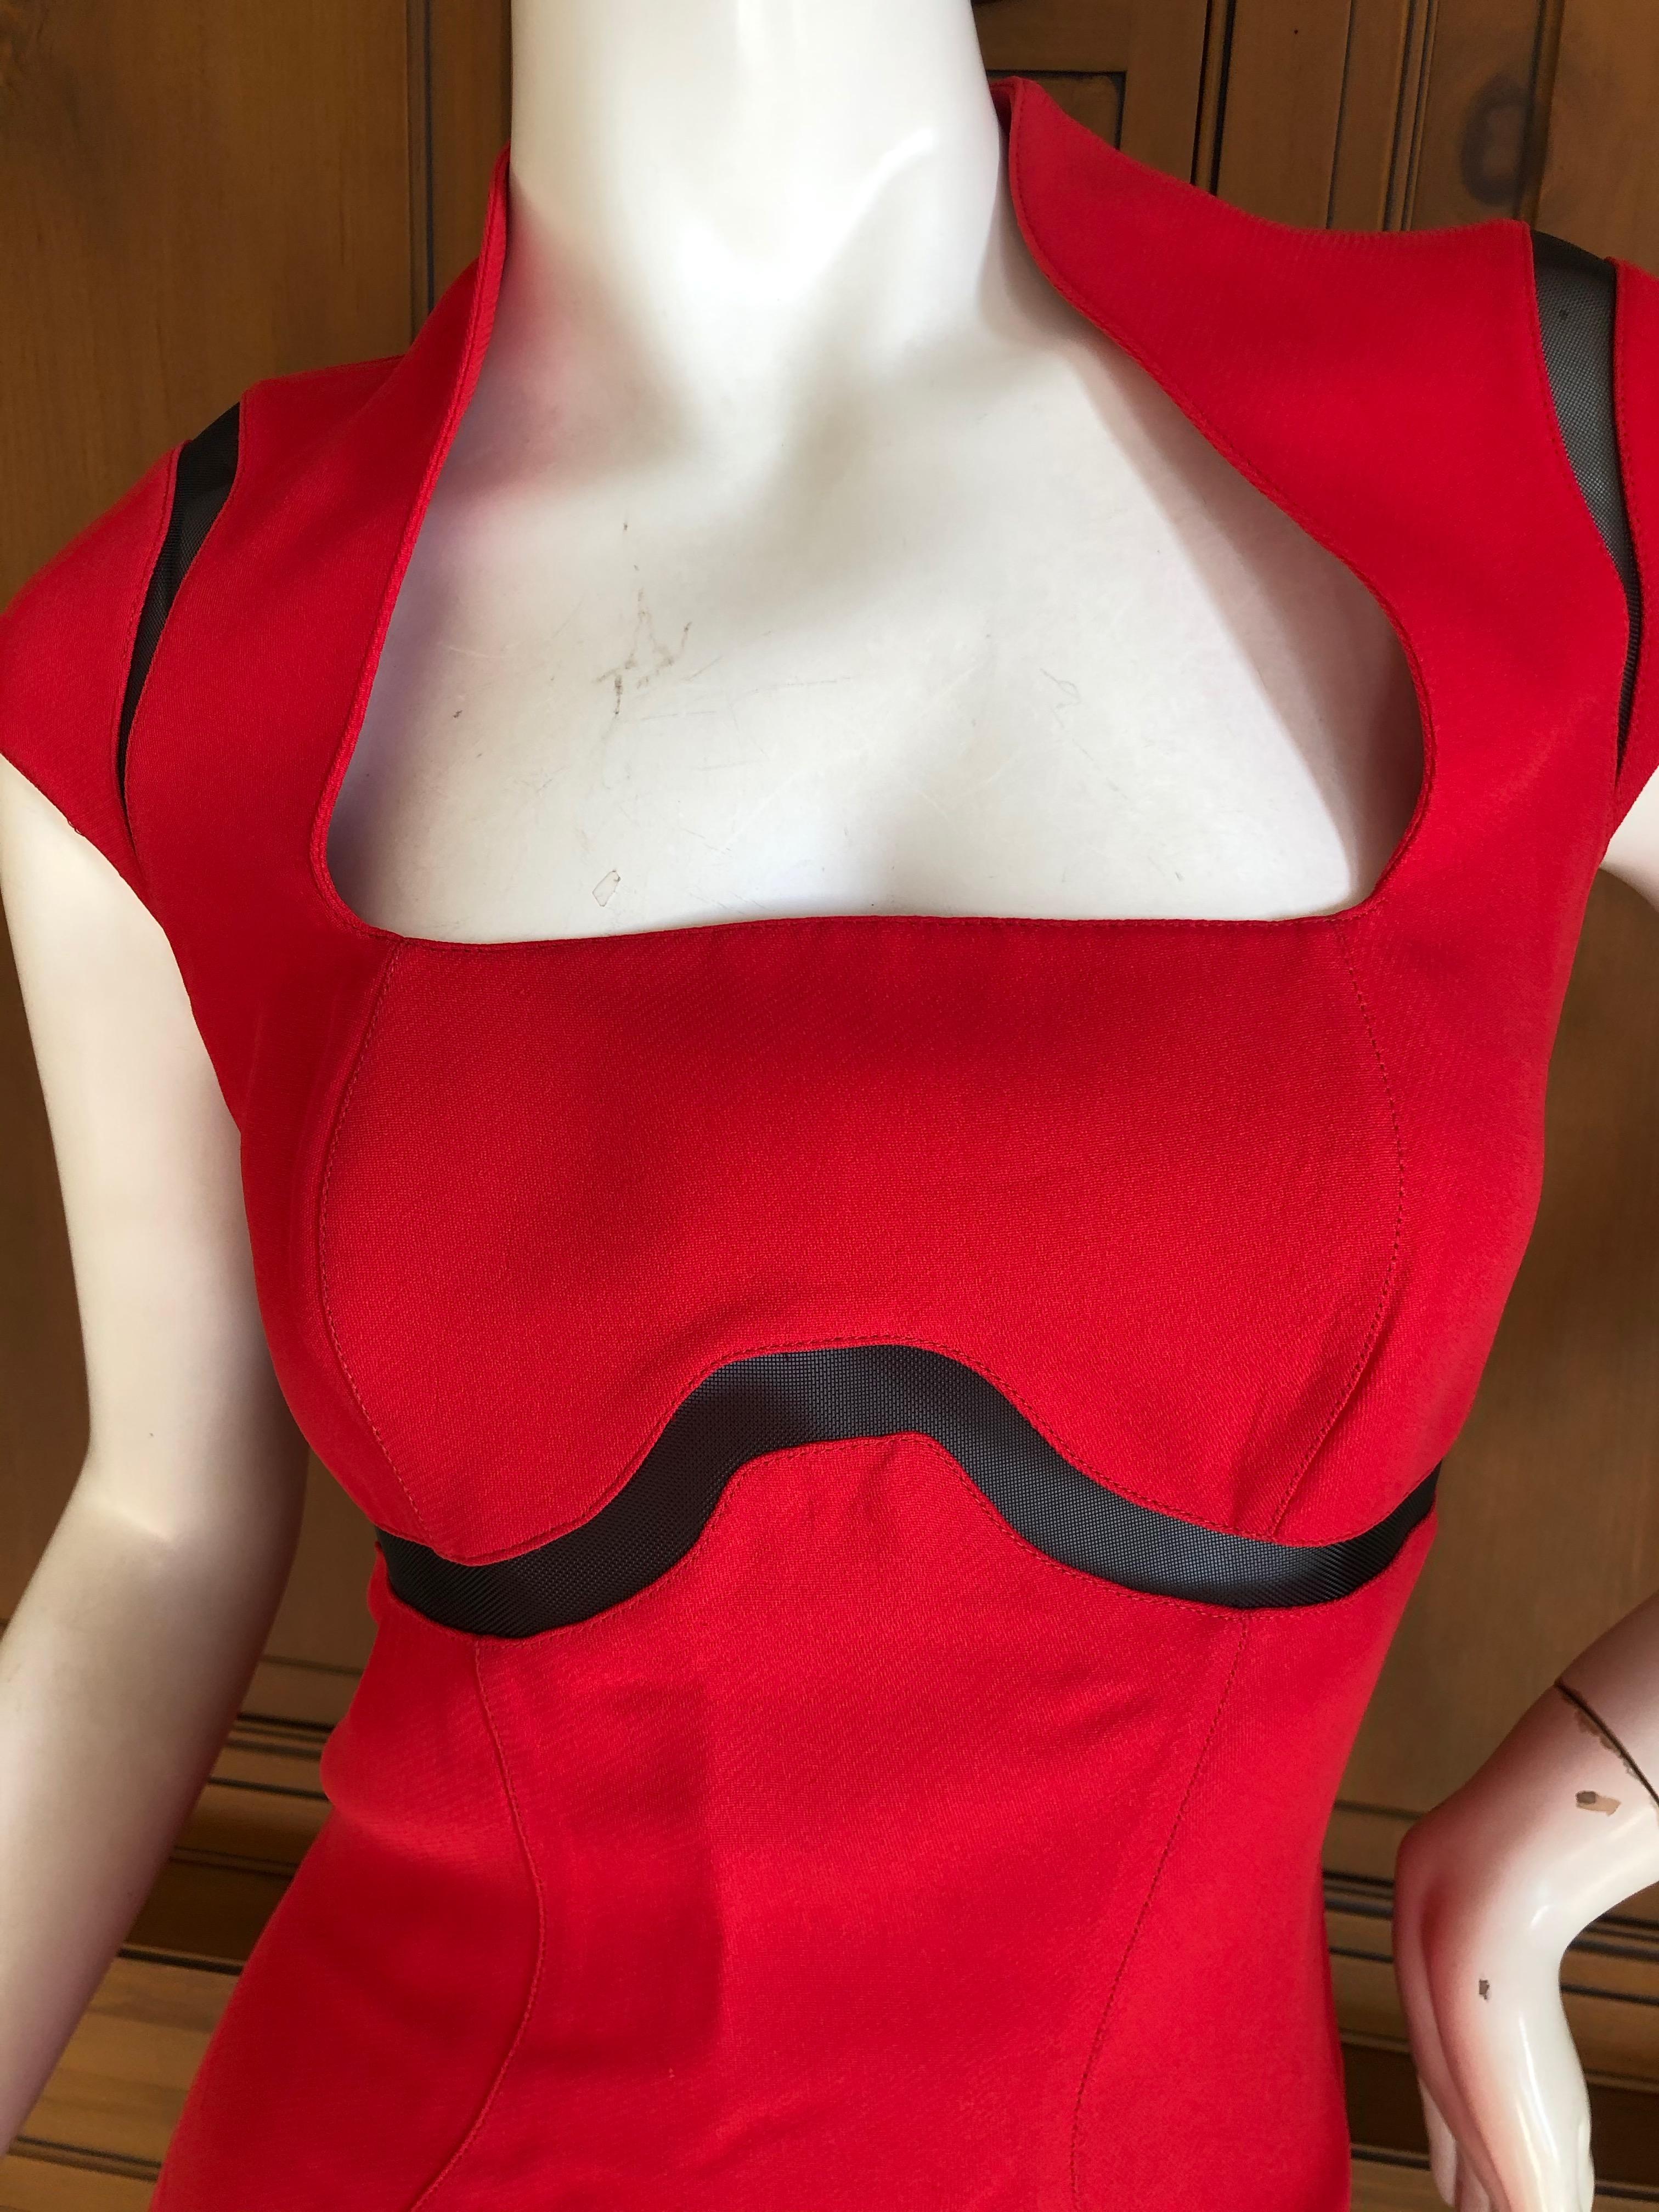 Thierry Mugler Vintage 1980's Red Cocktail Dress with Sheer Inserts In Excellent Condition For Sale In Cloverdale, CA